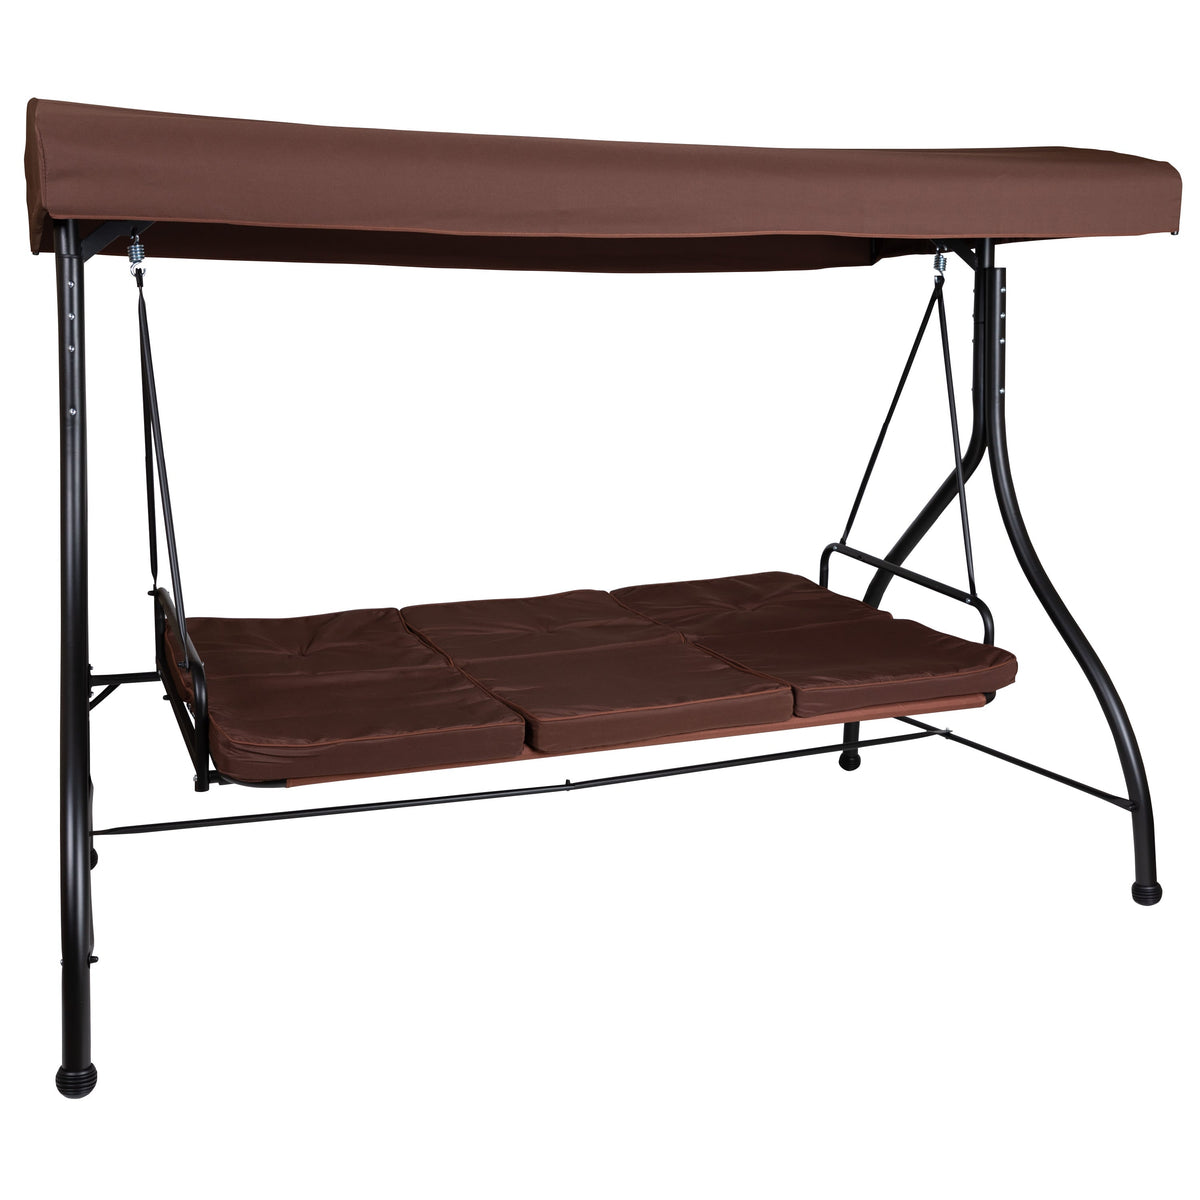 Brown |#| 3-Seat Outdoor Steel Converting Patio Swing and Bed Canopy Hammock in Brown